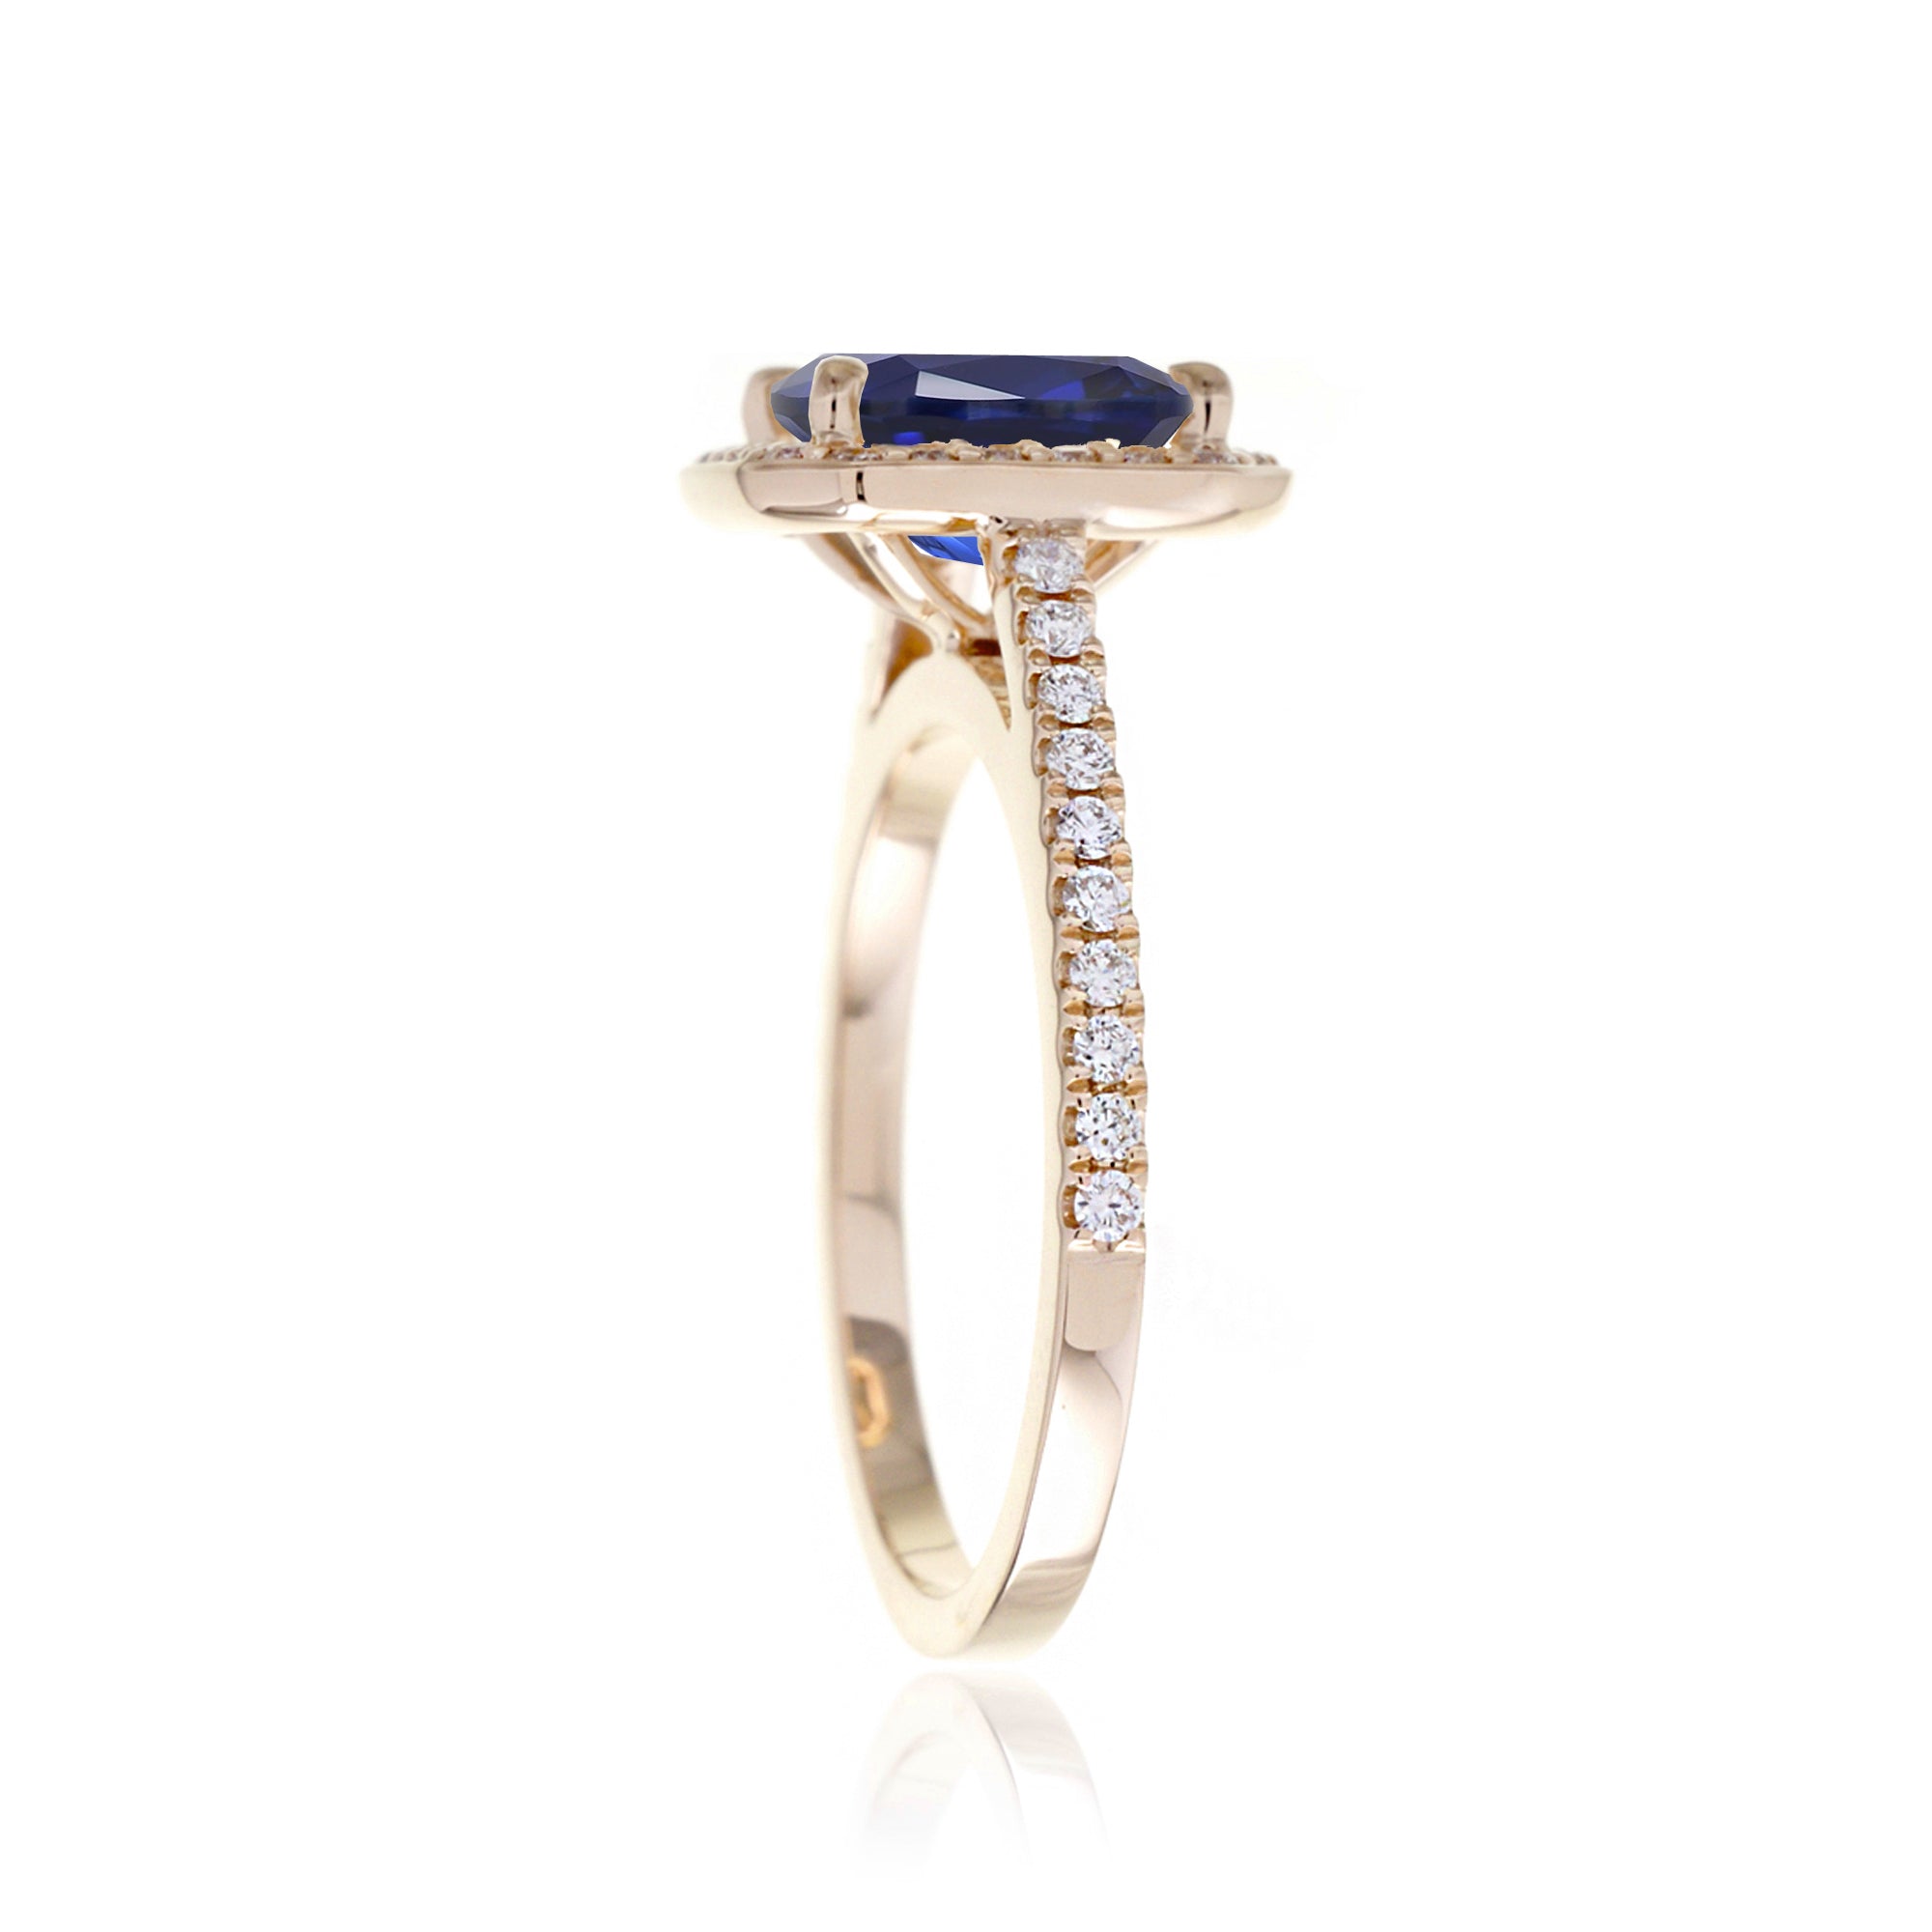 Cushion lab-grown sapphire diamond halo cathedral engagement ring - the Steffy yellow gold